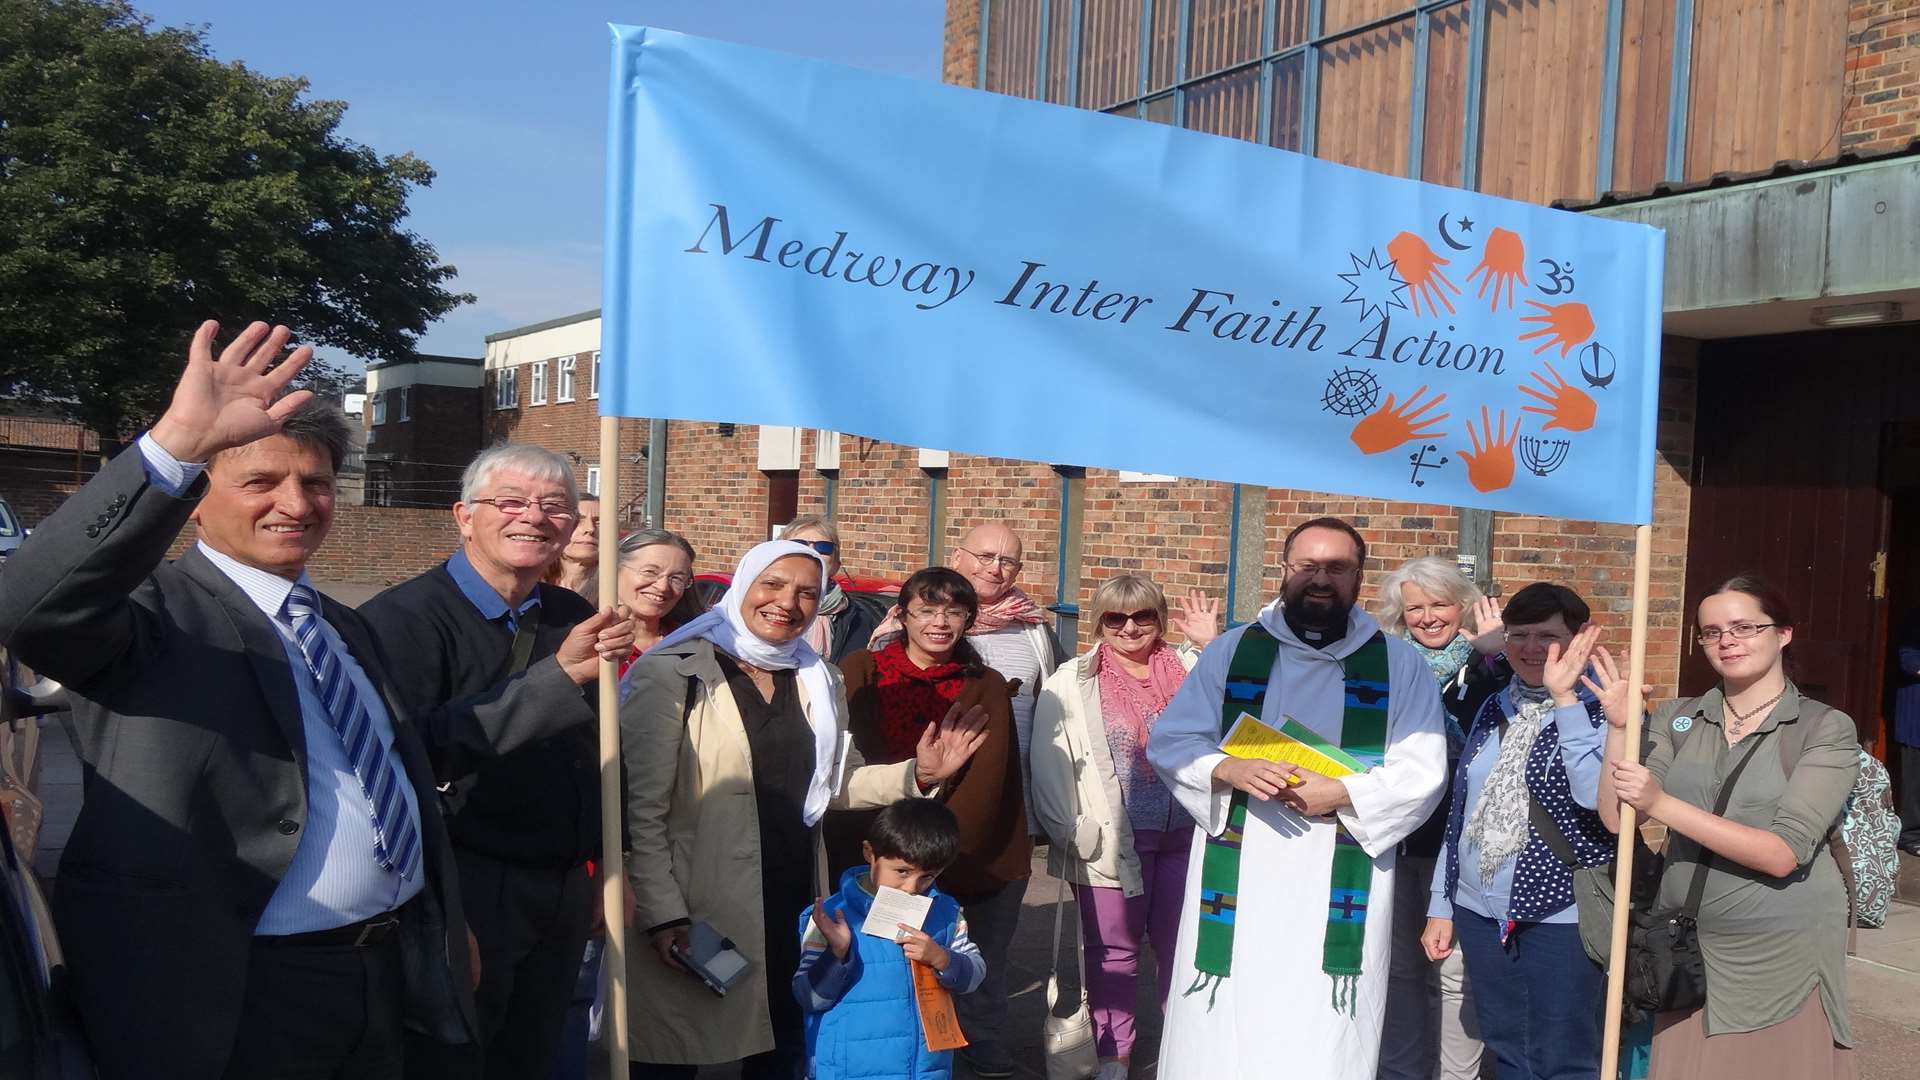 The walk is being organised by Medway Inter Faith Action